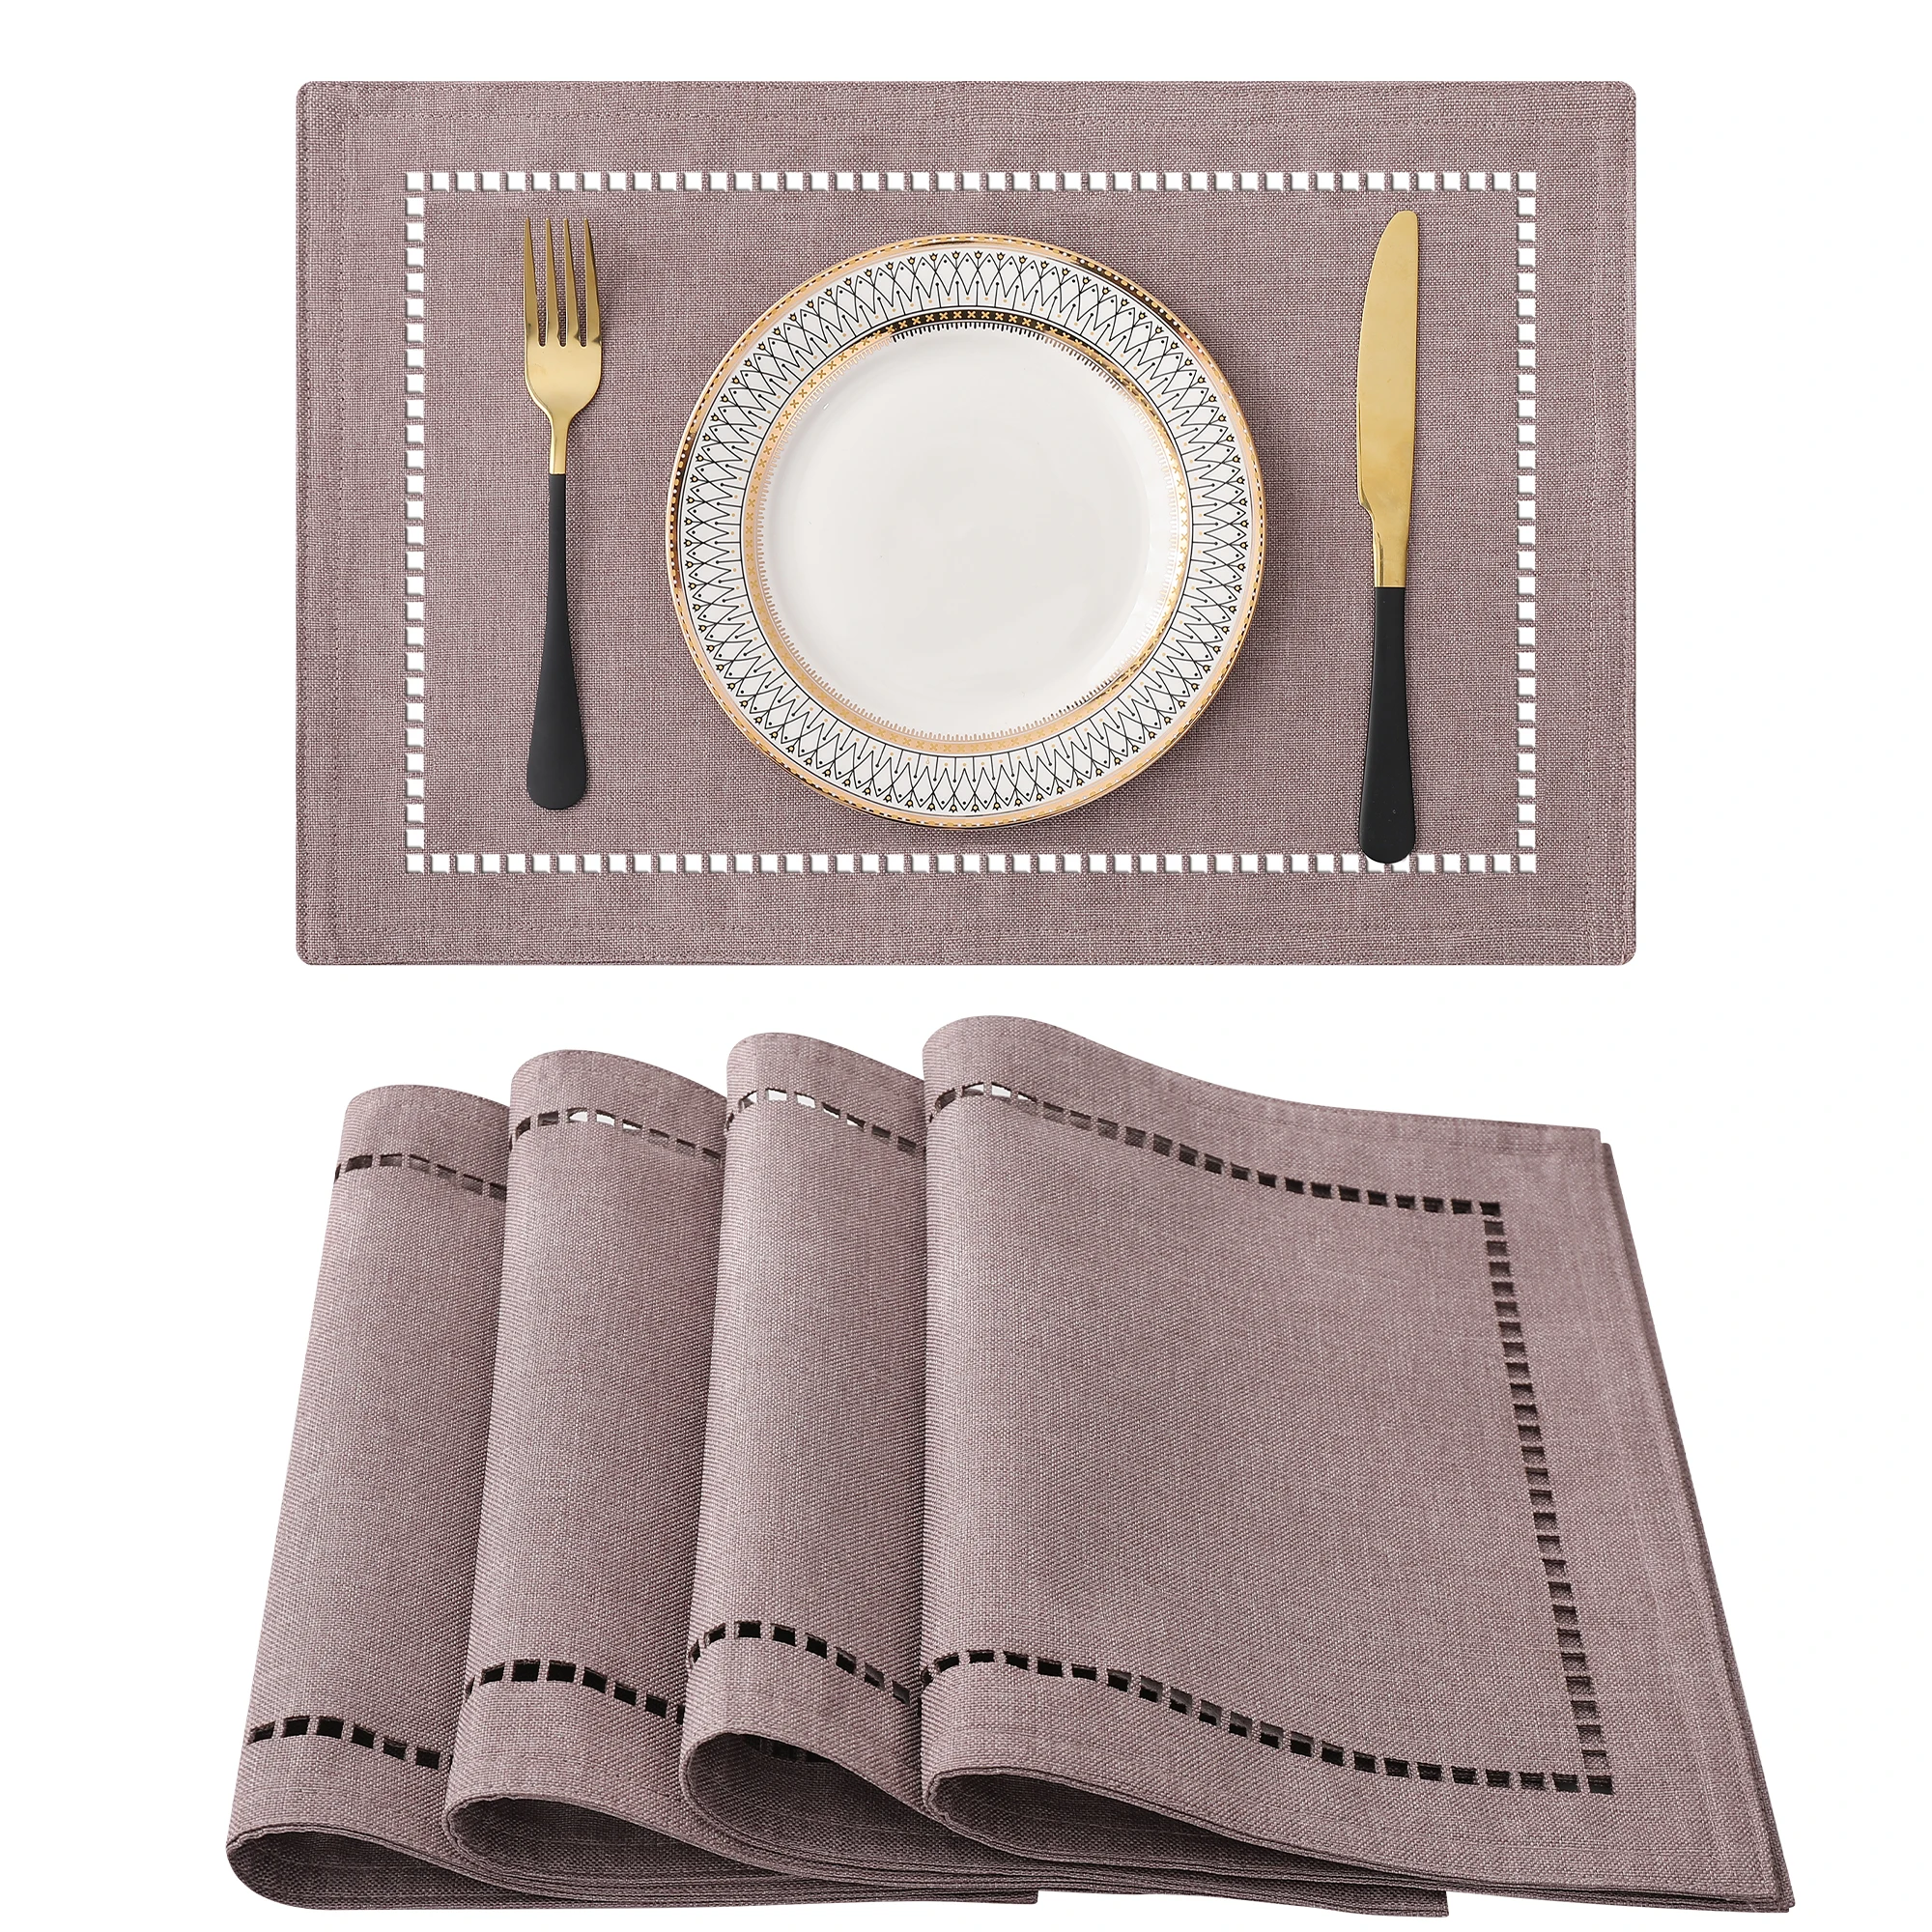 

Olanly Linen Table Mat Kitchen Heat Resistant Padding Non-slip Coaster Placemat Tableware Cup Mat For Home Decor Accessories